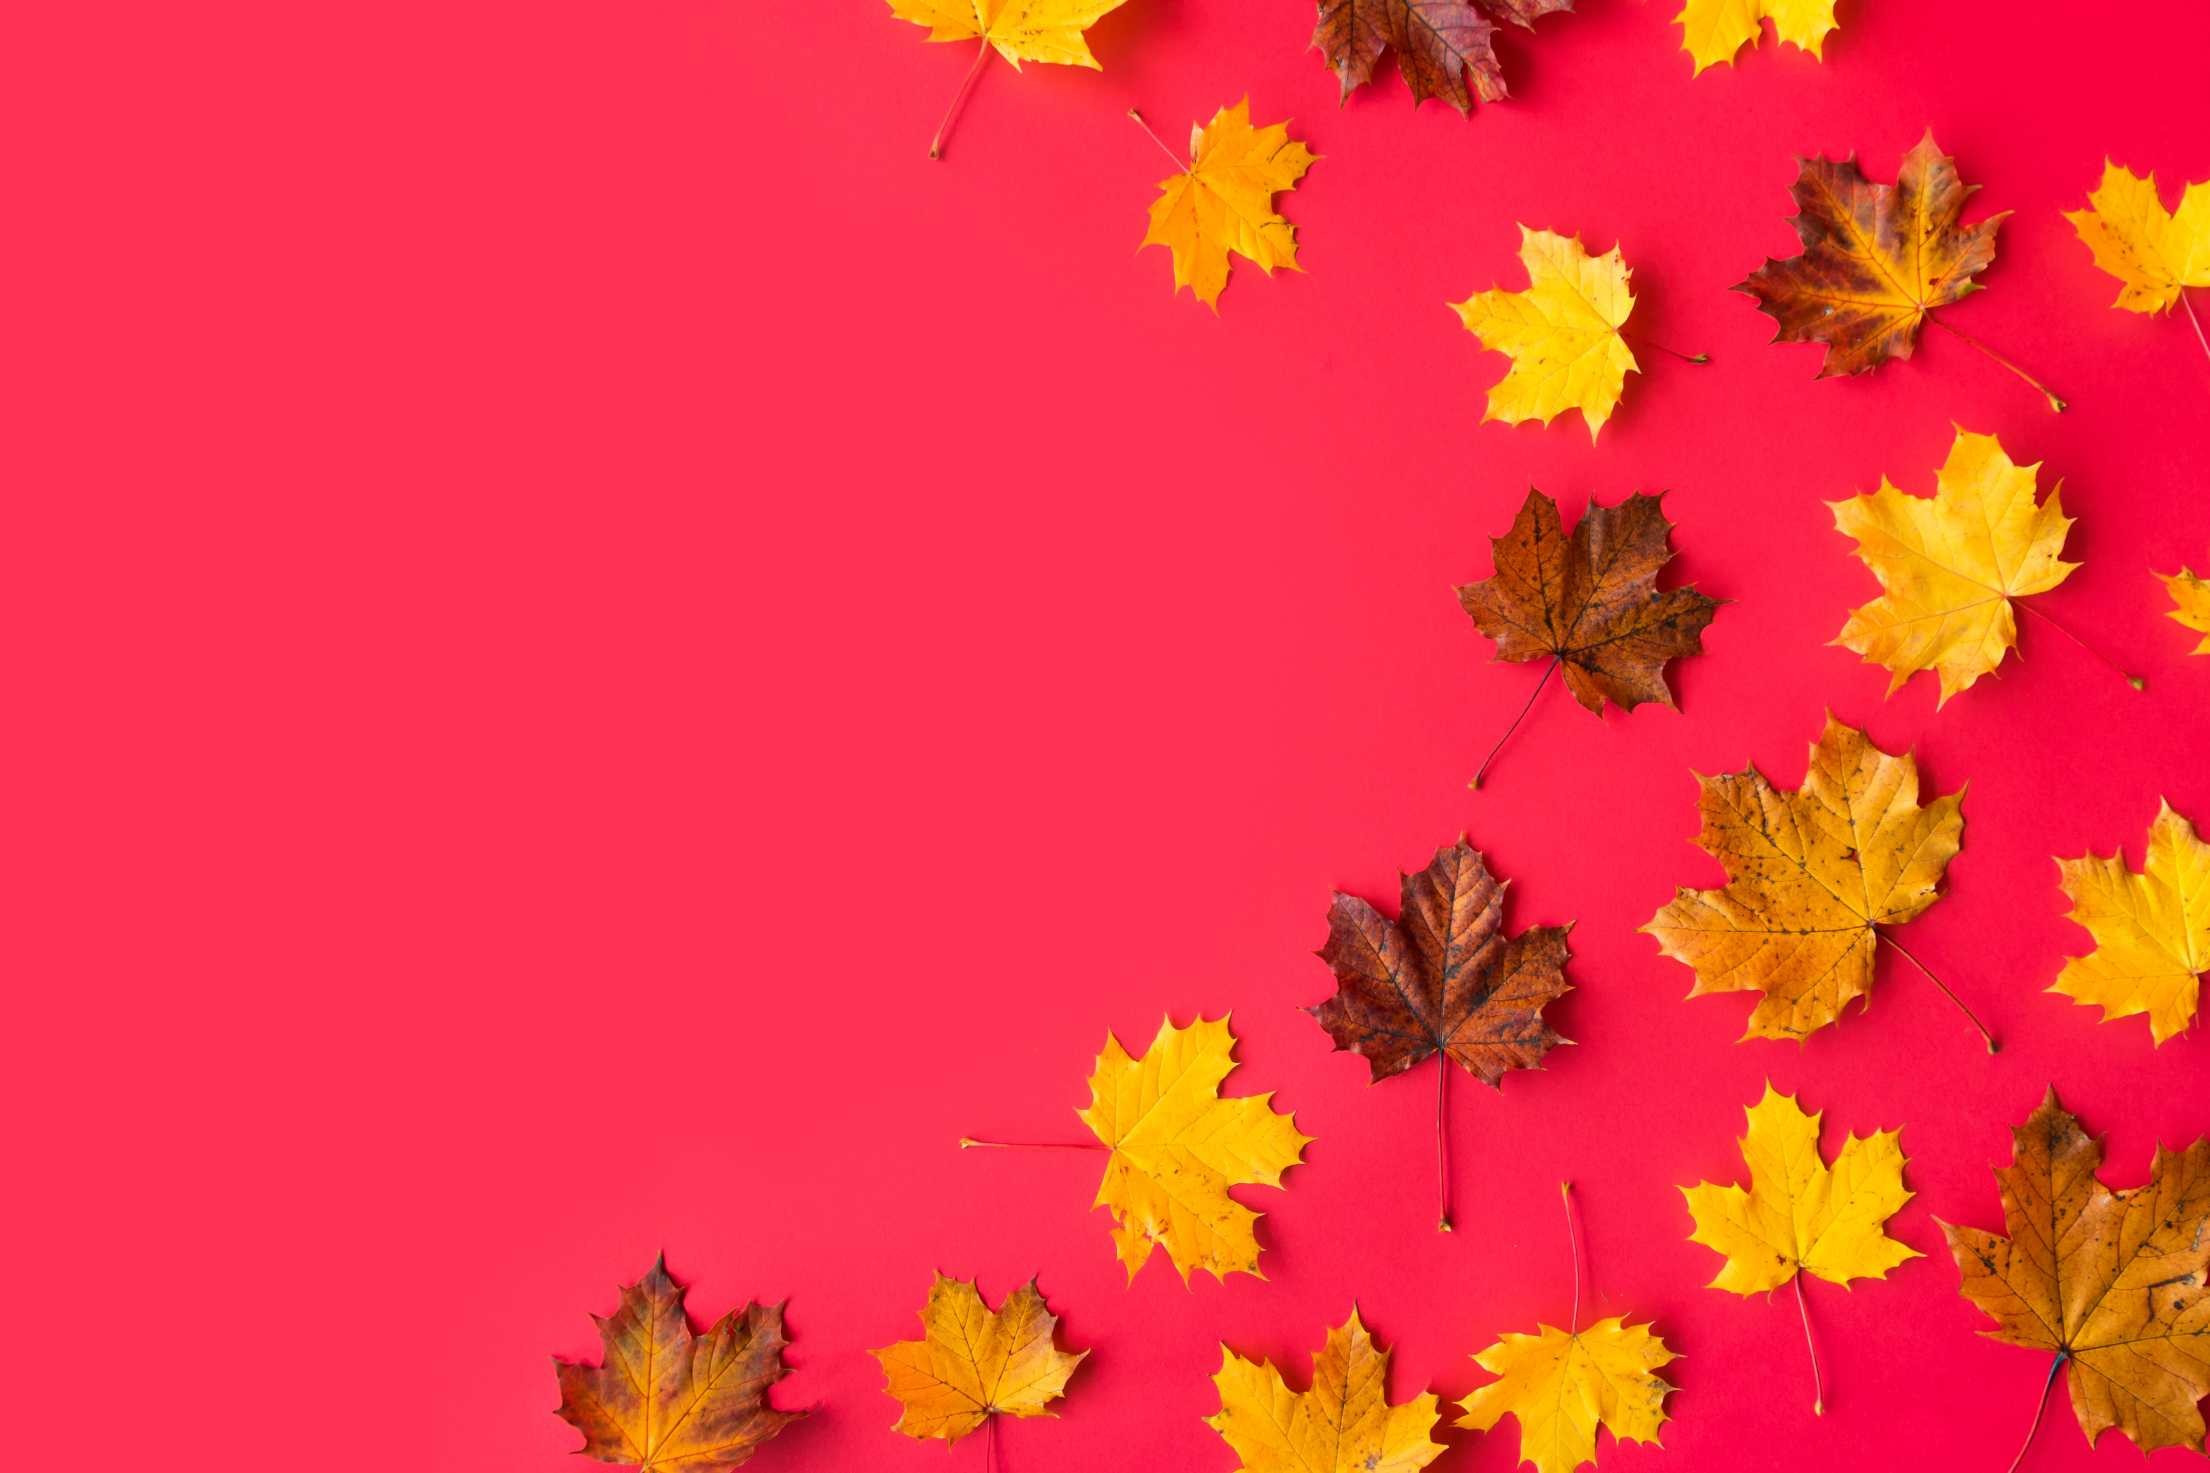 2210x1473 Autumn Leaves on Flat Red Background with Room for Text #2 Free Stock Photo